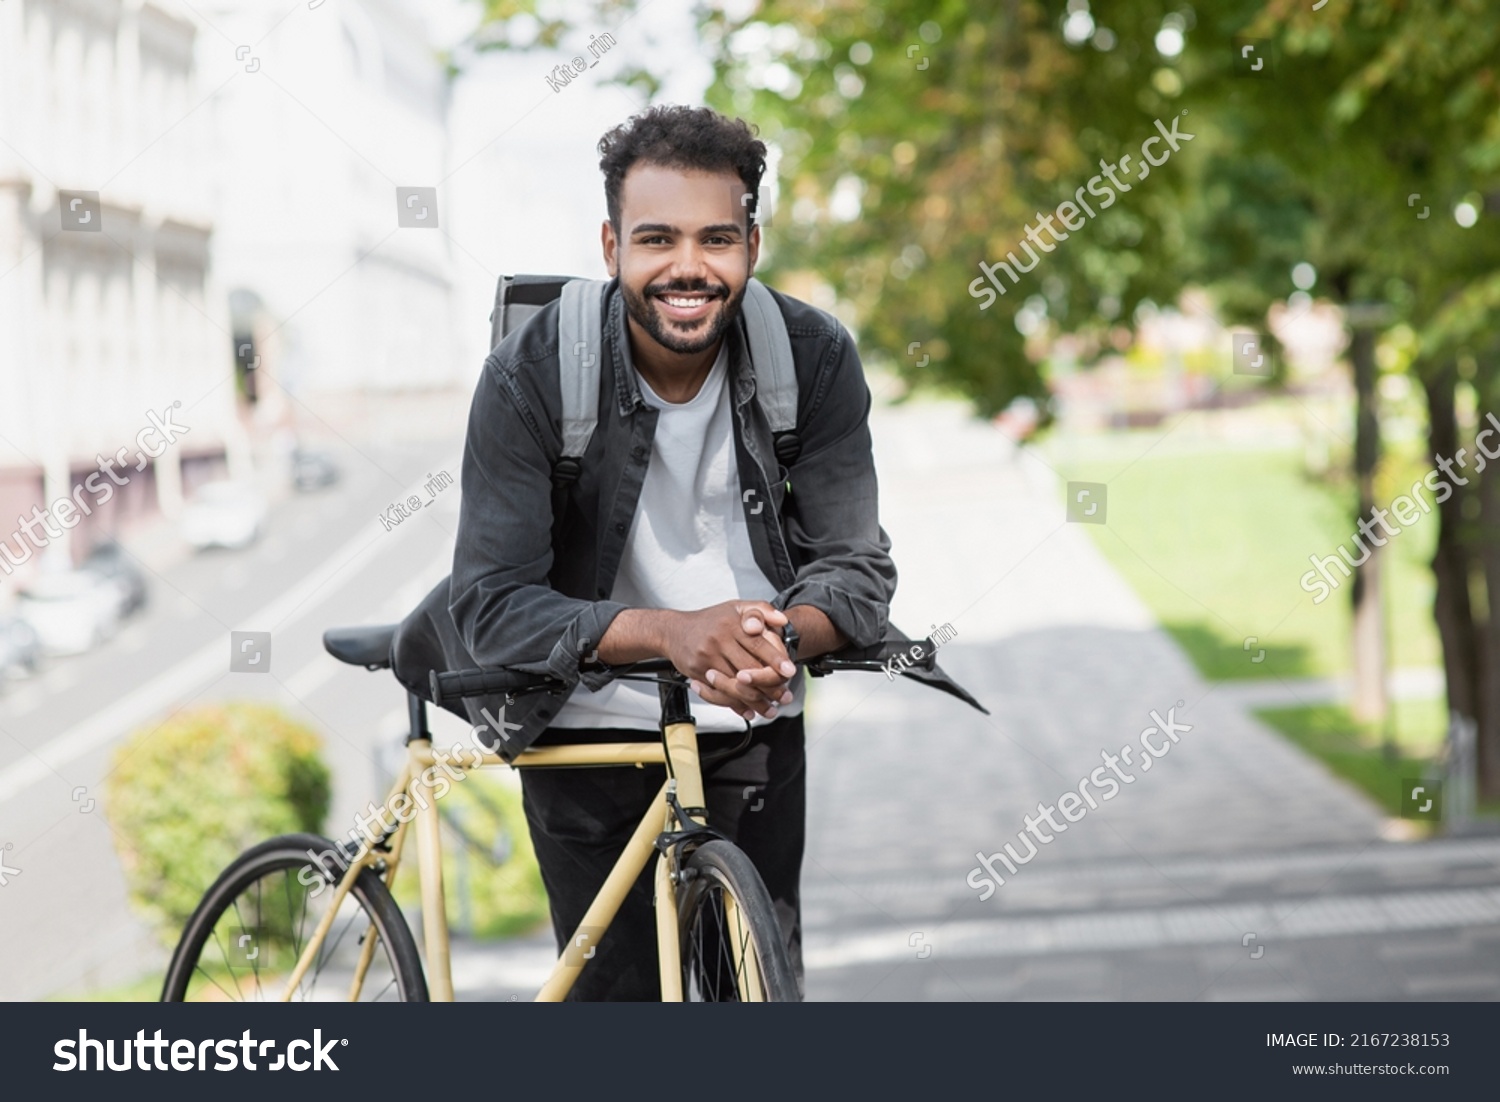 Handsome happy young man with bicycle on a city street, Active lifestyle, people concept #2167238153